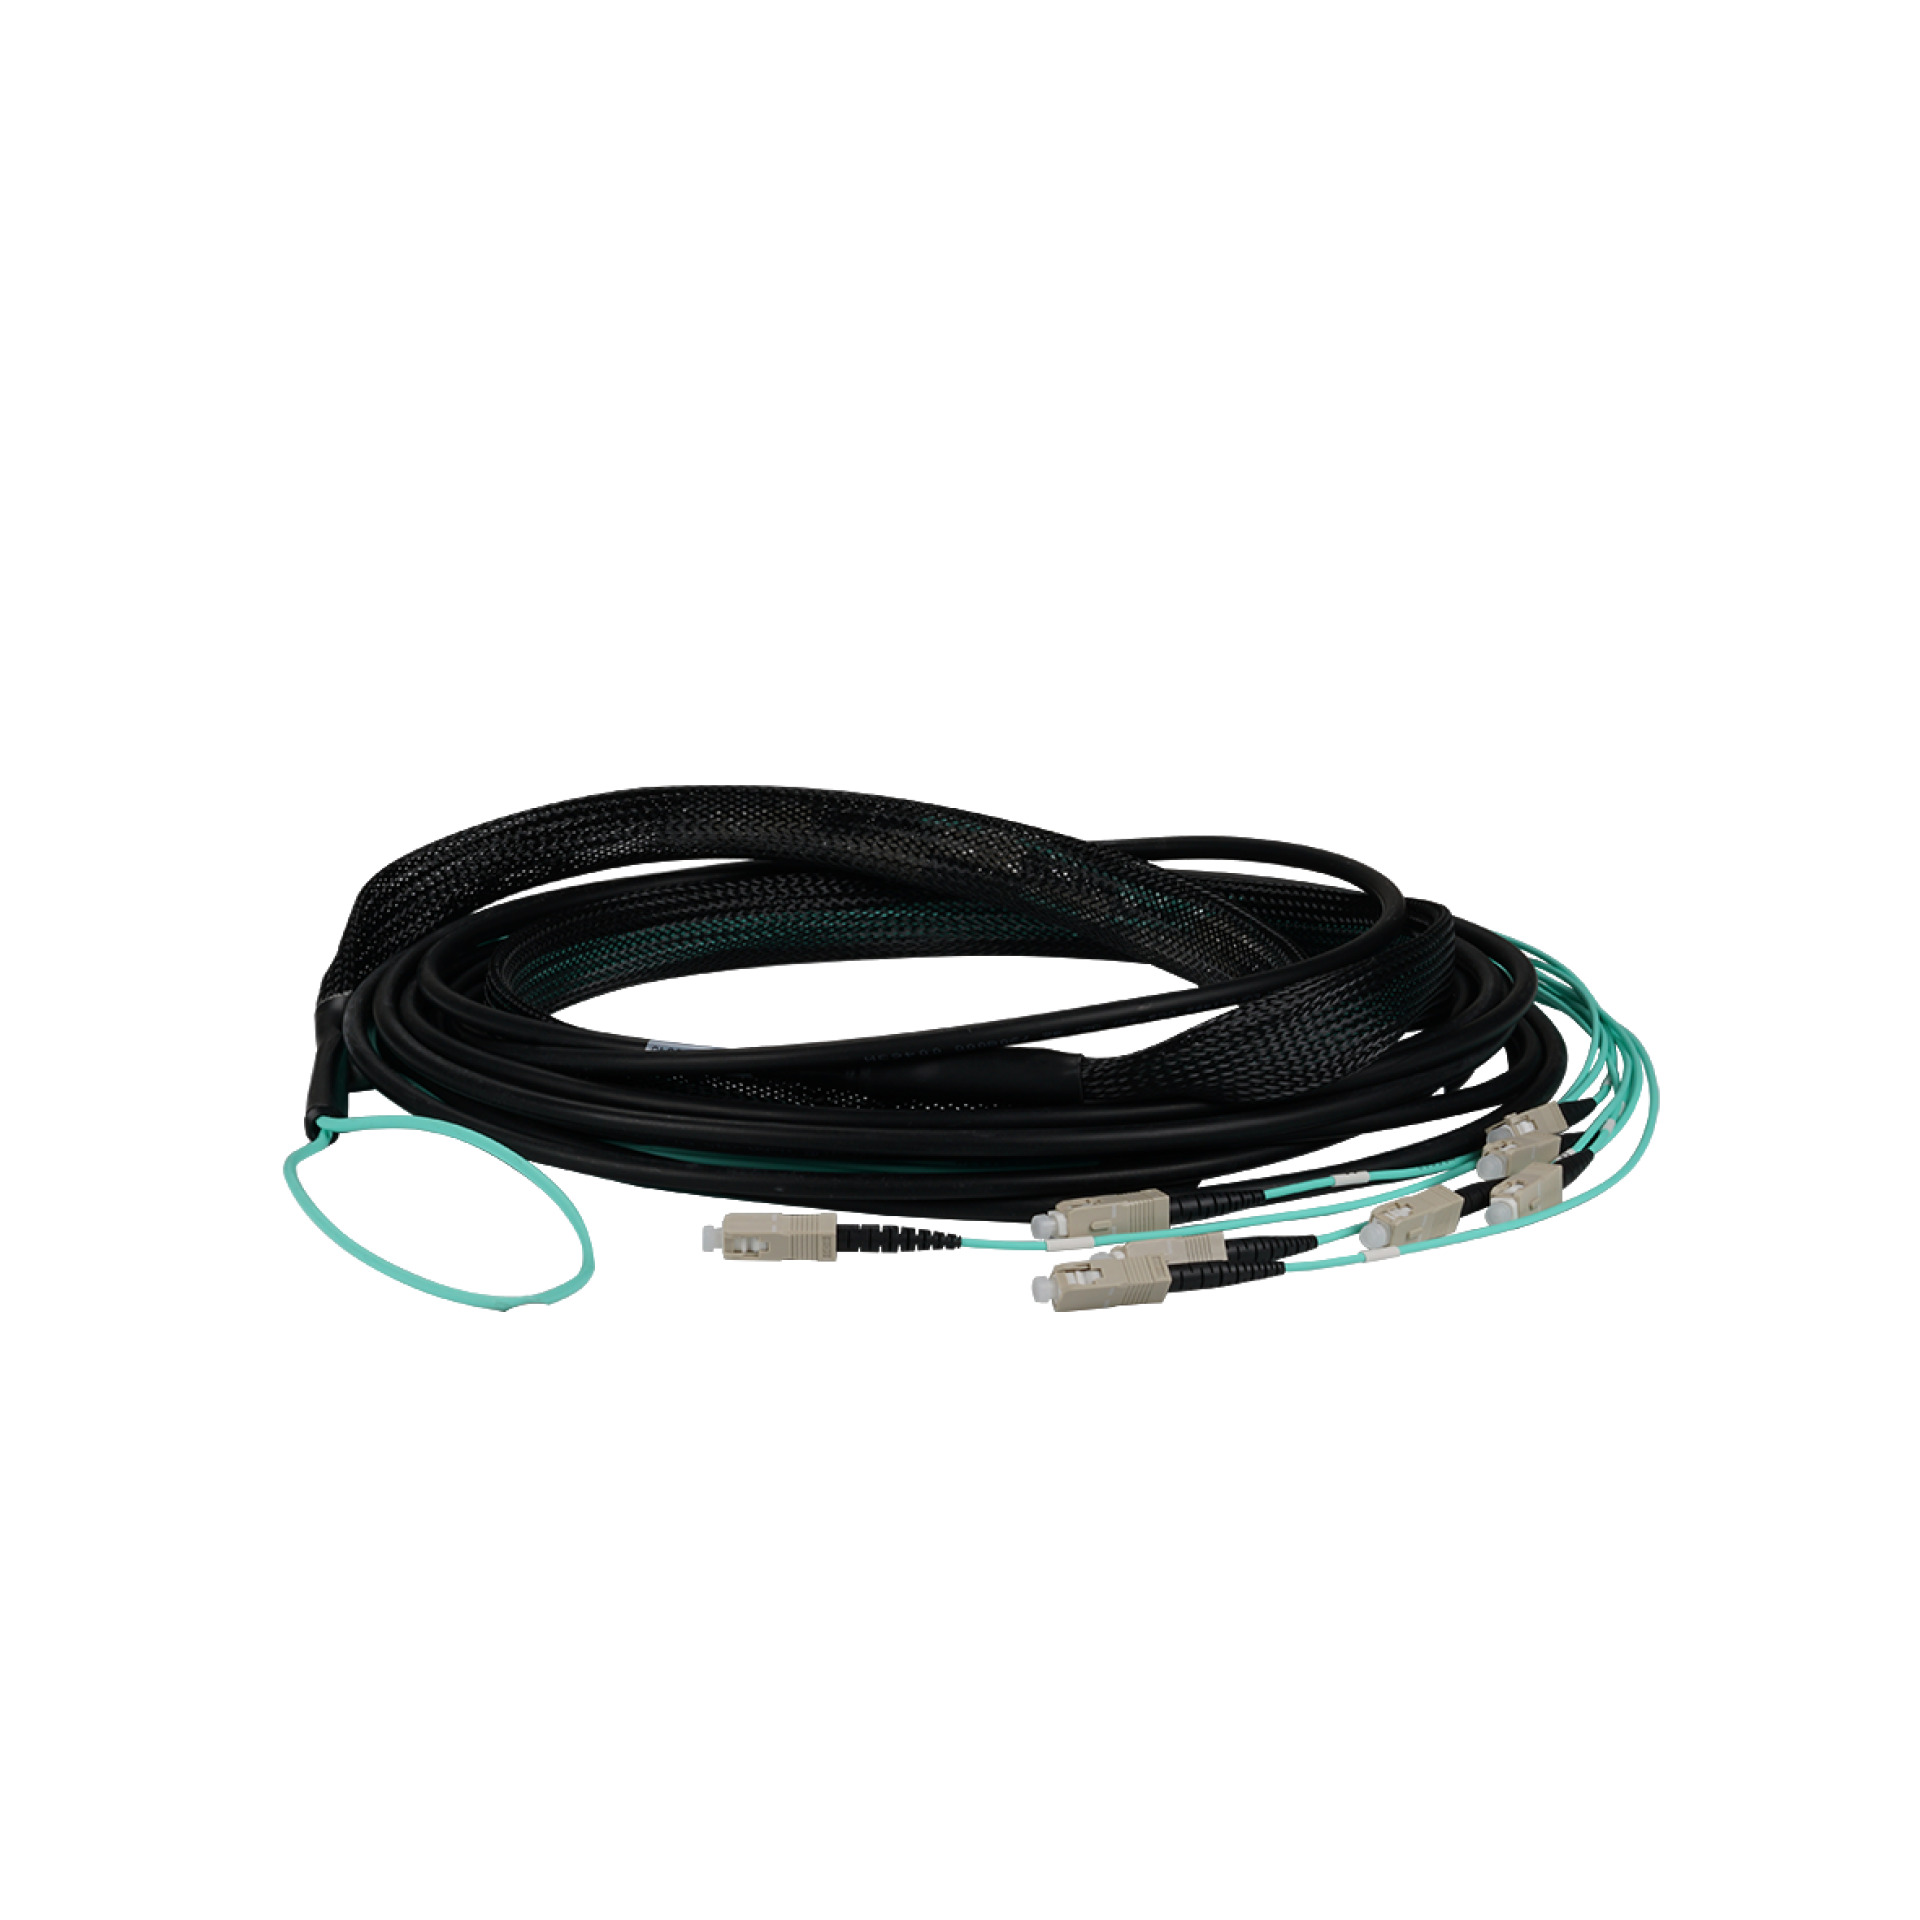 Trunk cable U-DQ(ZN)BH 4G 50/125, SC/SC OM3 80m